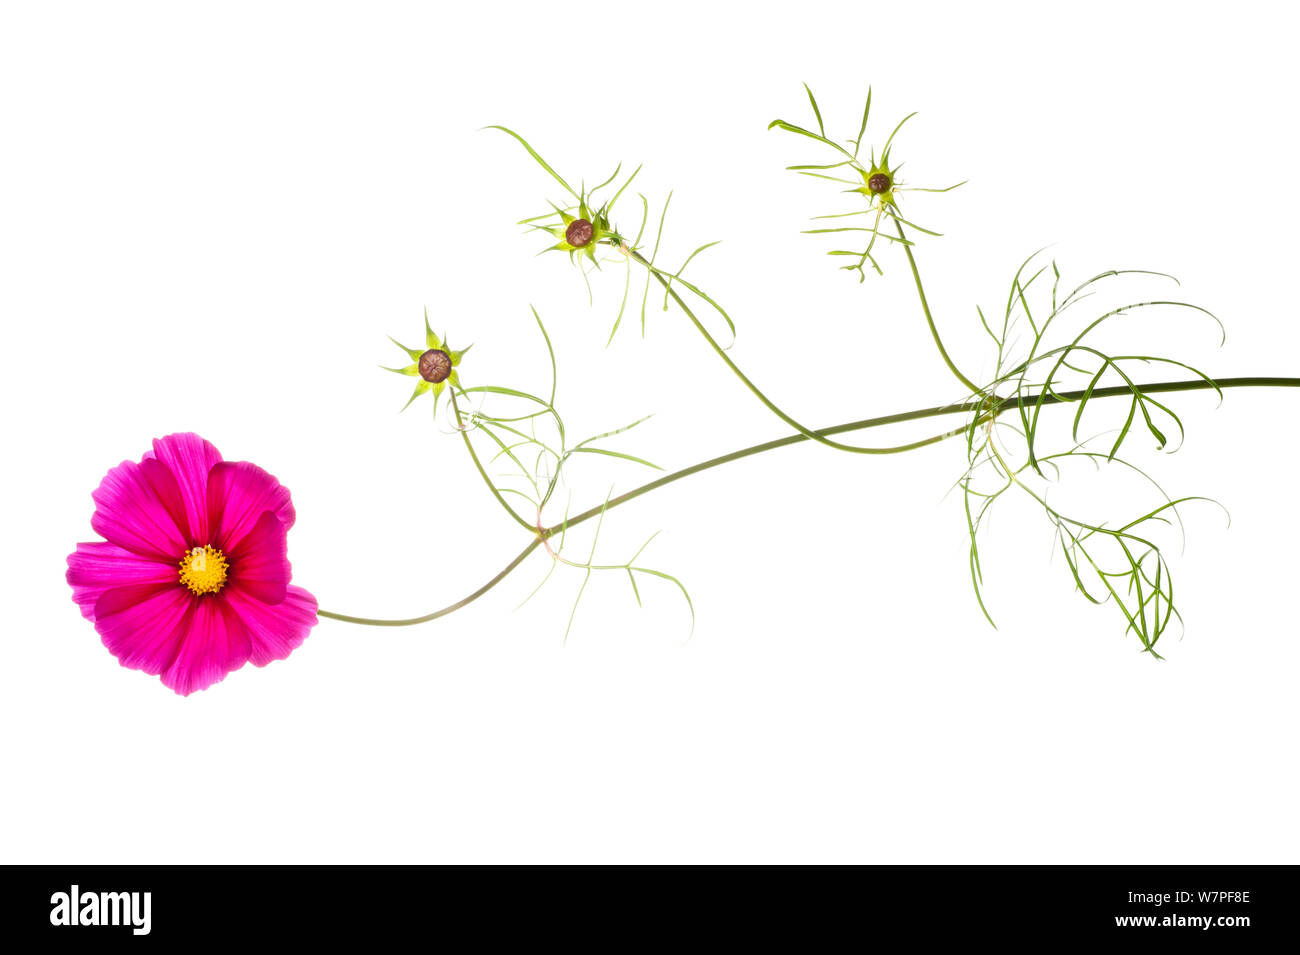 Cosmos (Cosmo sp.) in flower. France, Europe, August. Stock Photo